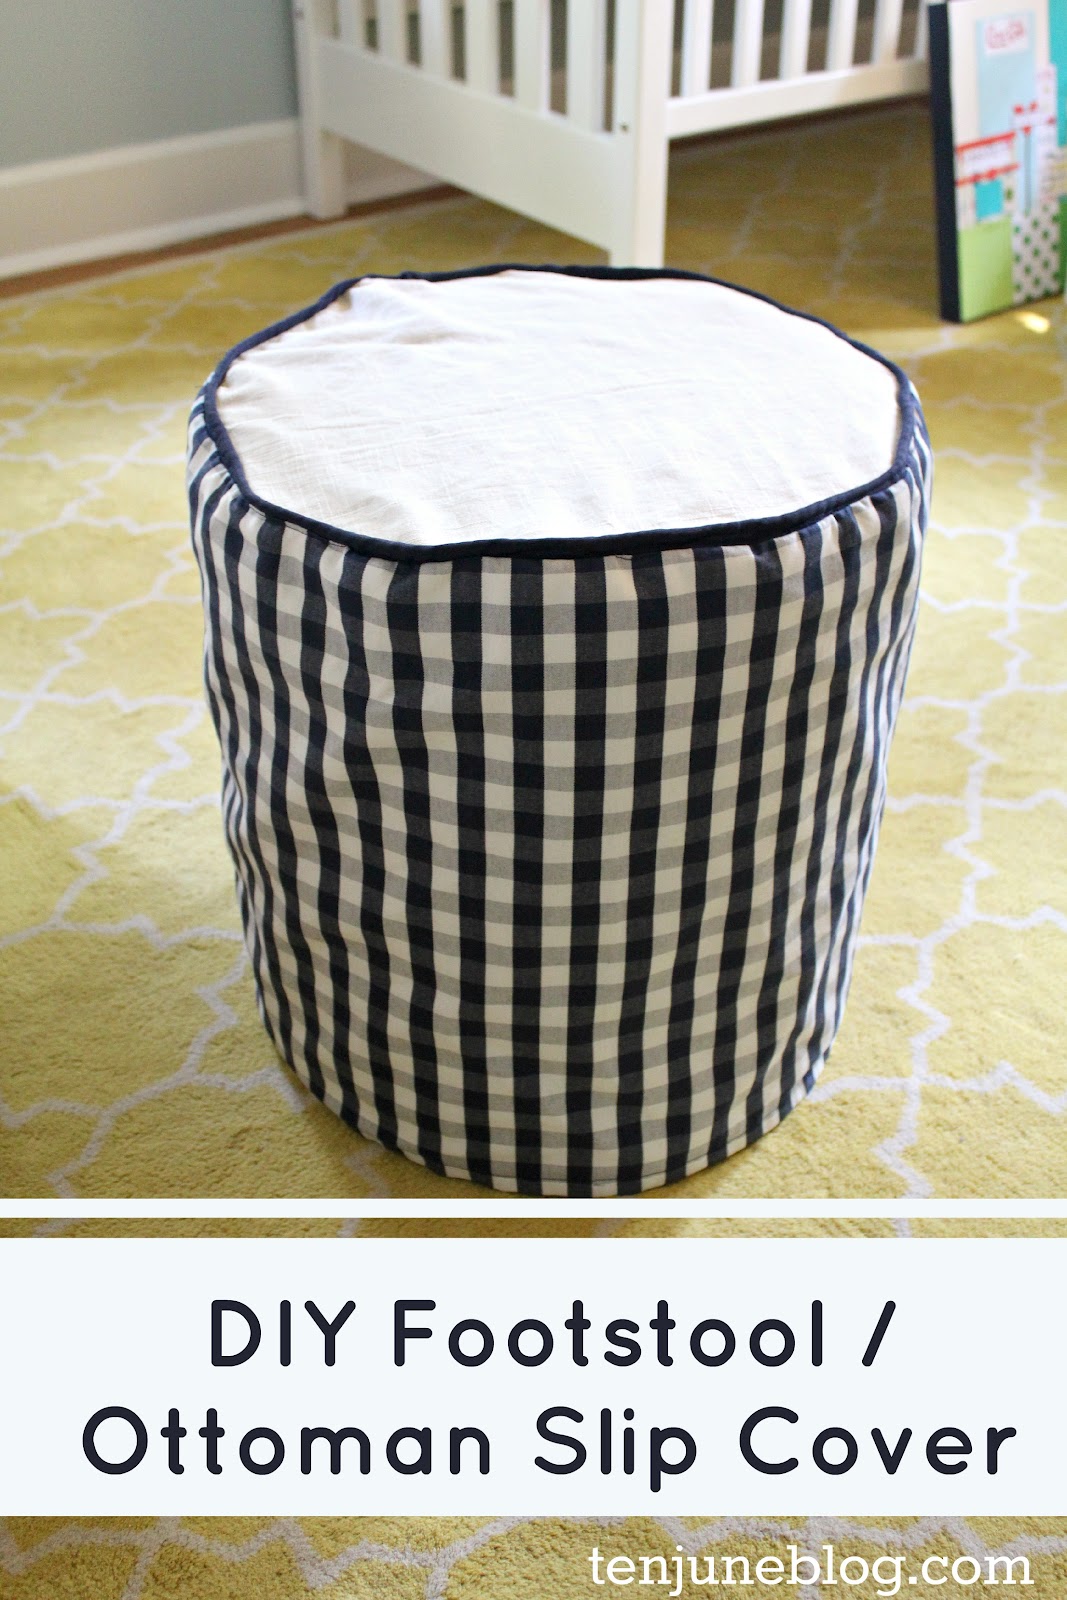 Ten June: DIY Footstool / Ottoman Slip Cover with Piping Tutorial